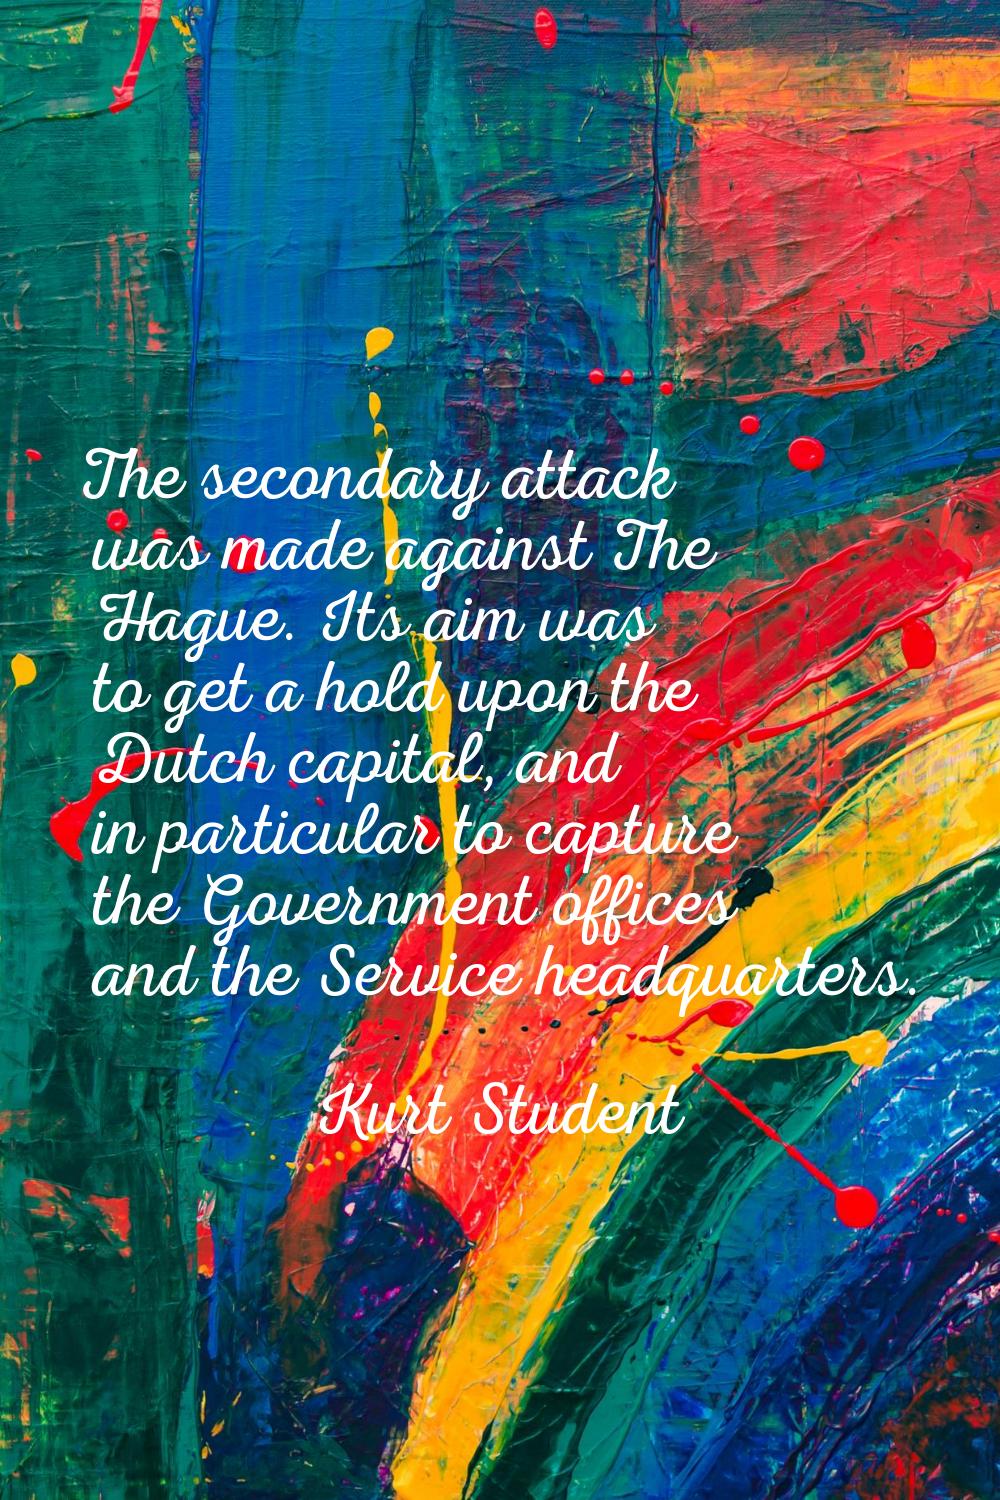 The secondary attack was made against The Hague. Its aim was to get a hold upon the Dutch capital, 